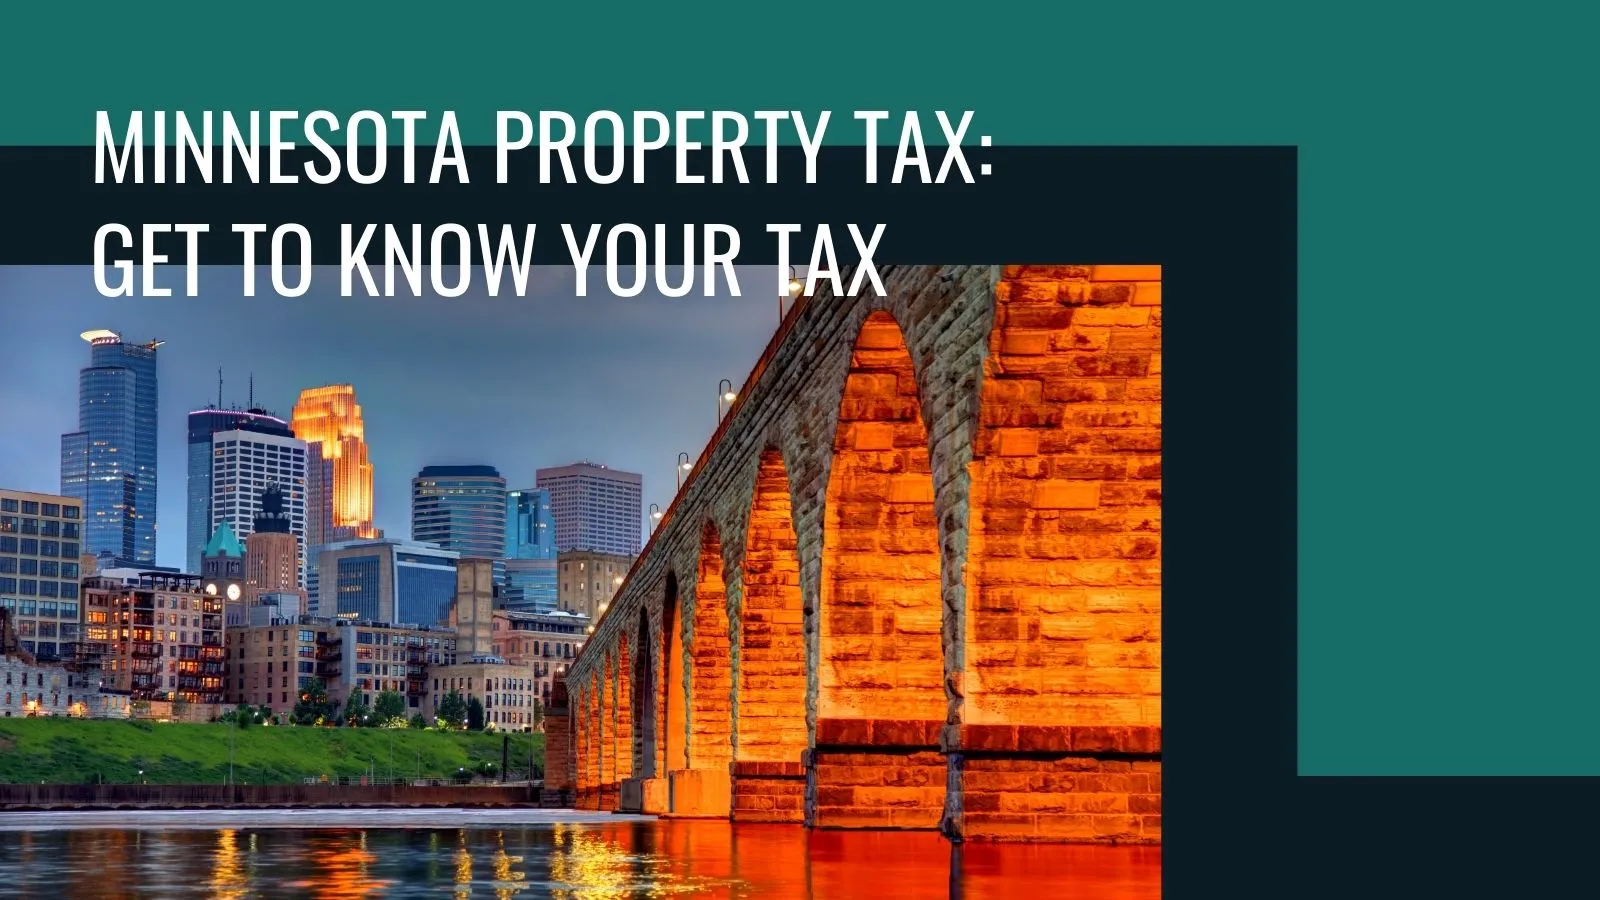 Minnesota Property Tax Rates: Counties' Rates